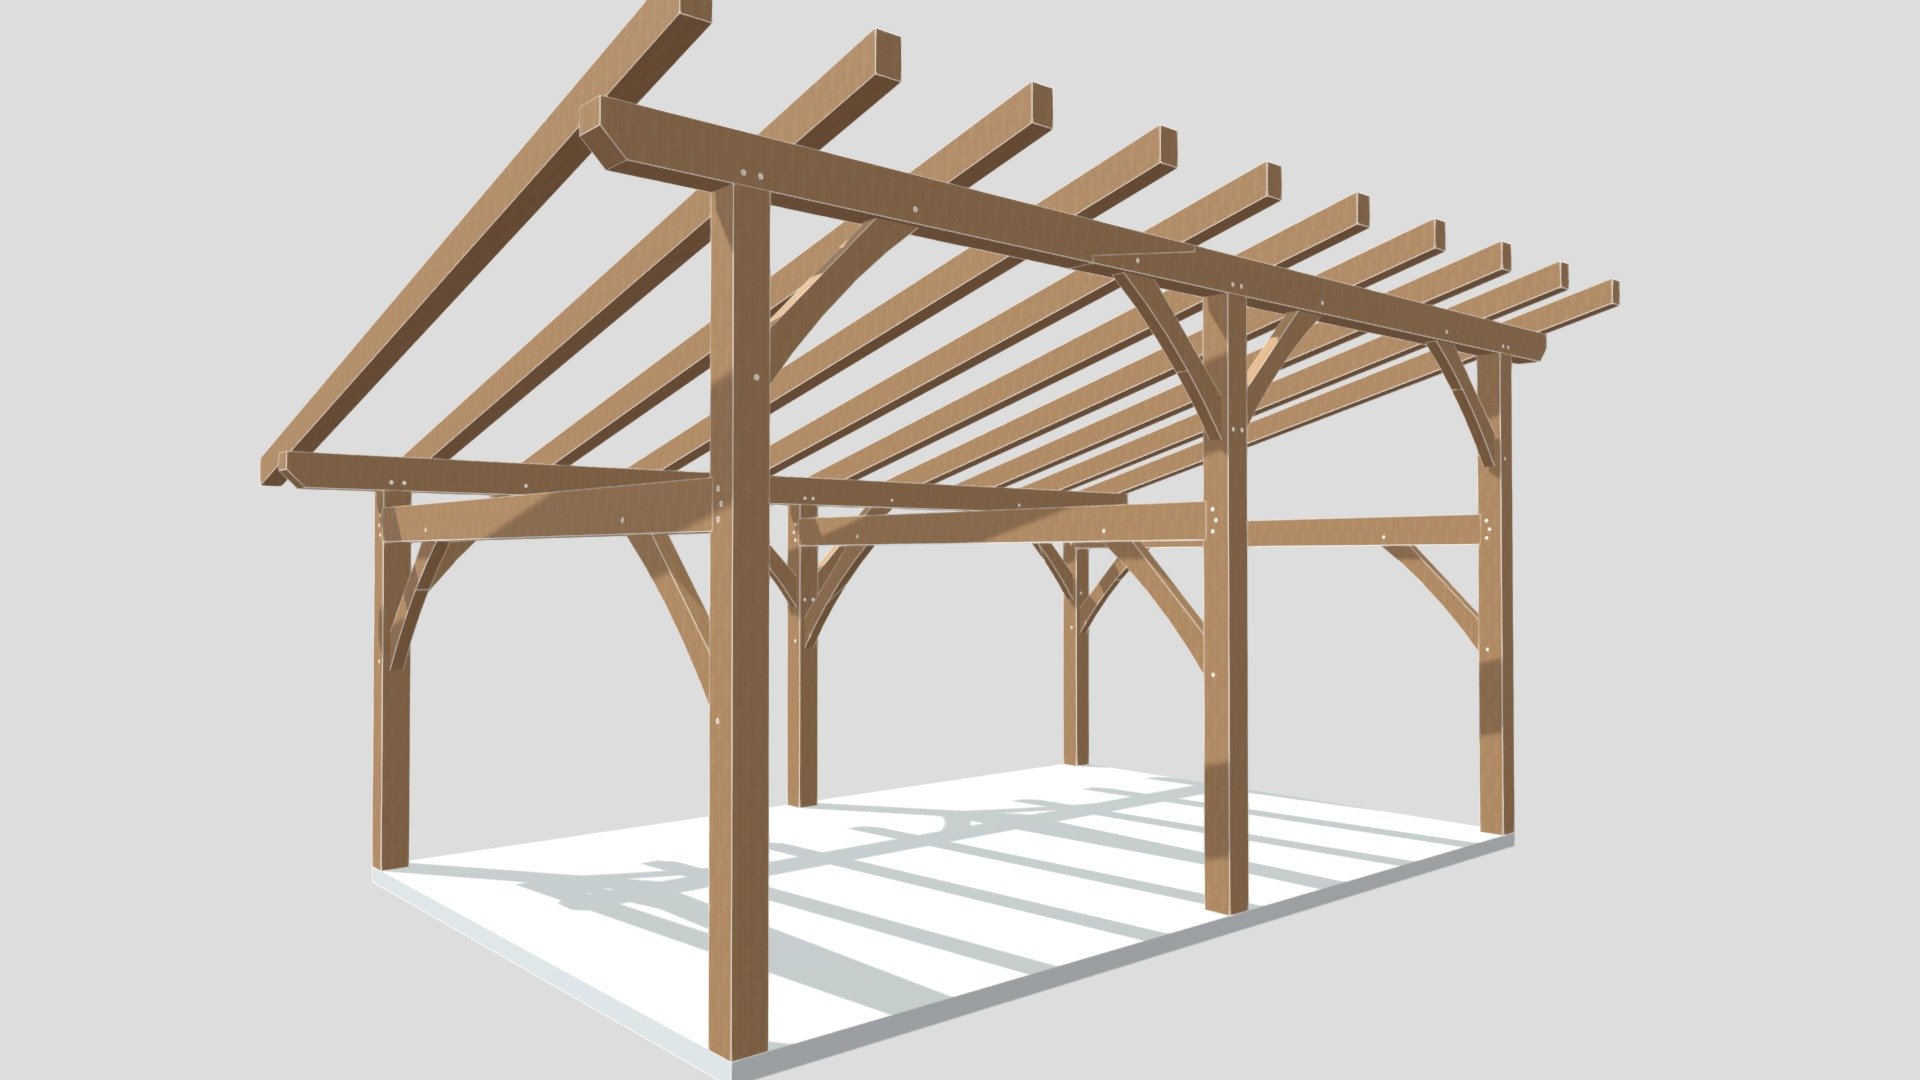 16x24 Lean-To Shed Roof Plan - 3D model by Timber Frame HQ ...